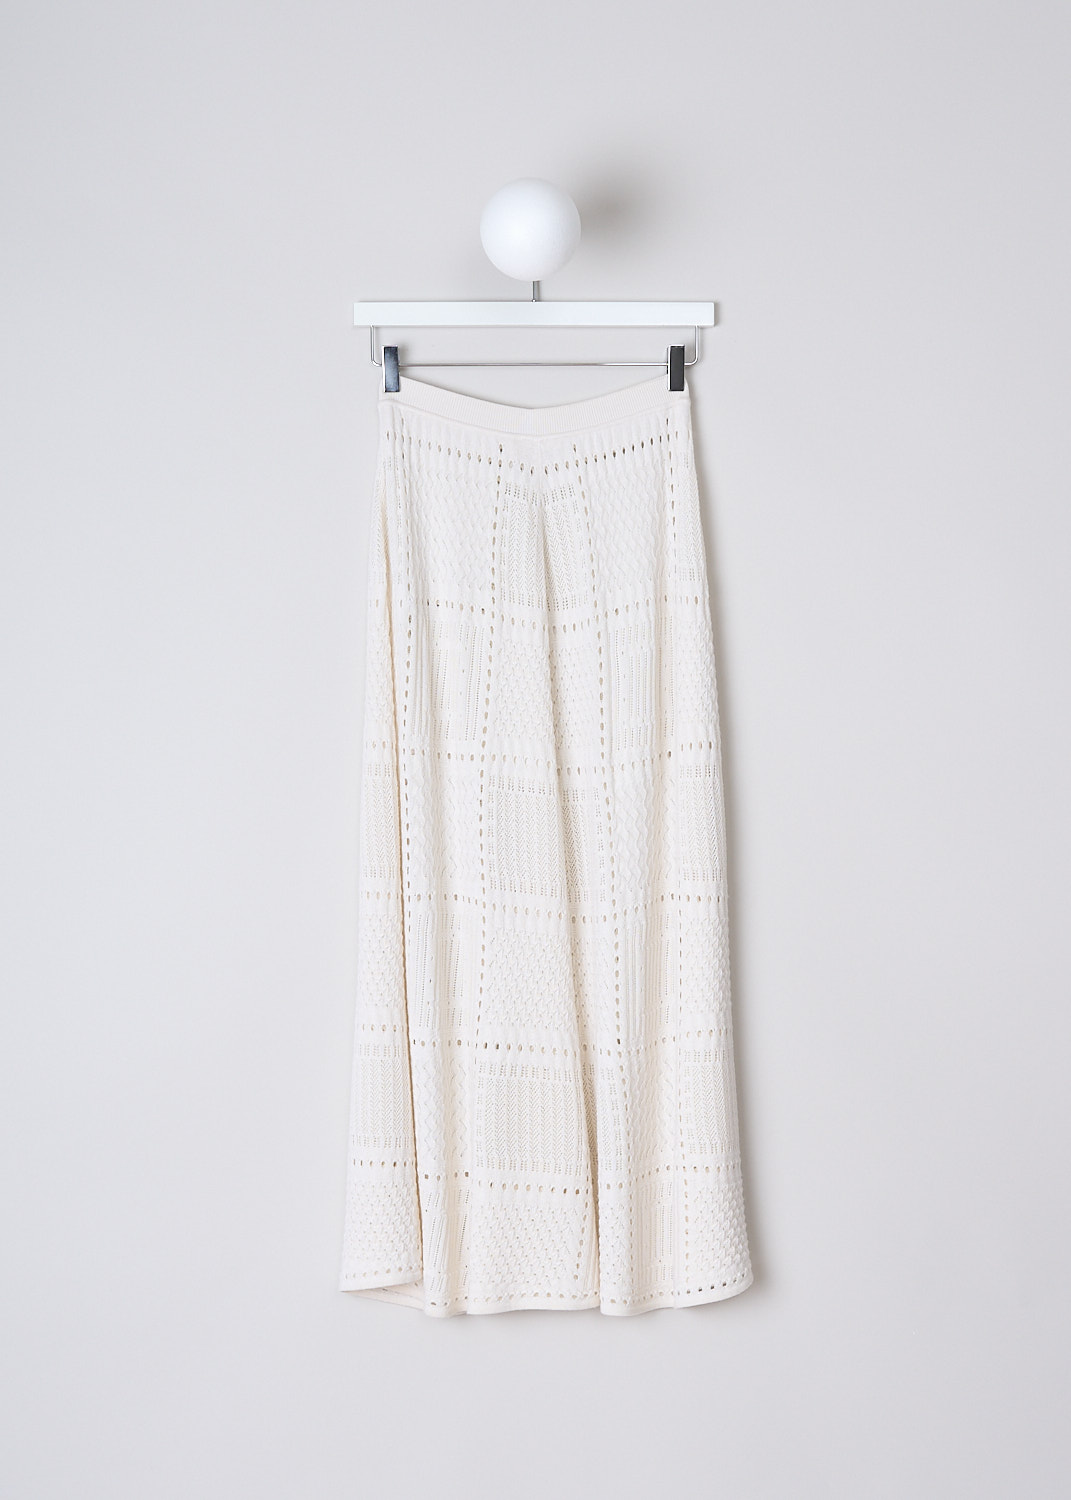 CHLOÉ, CLOUDY WHITE KNITTED MAXI SKIRT, CHC22SMJ05550121_CLOUDY_WHITE, White, Back, This Cloudy White knitted maxi skirt has a ribbed elasticated waistband and is finished with detailed openwork stitching throughout. The skirt has an ankle length cut.
